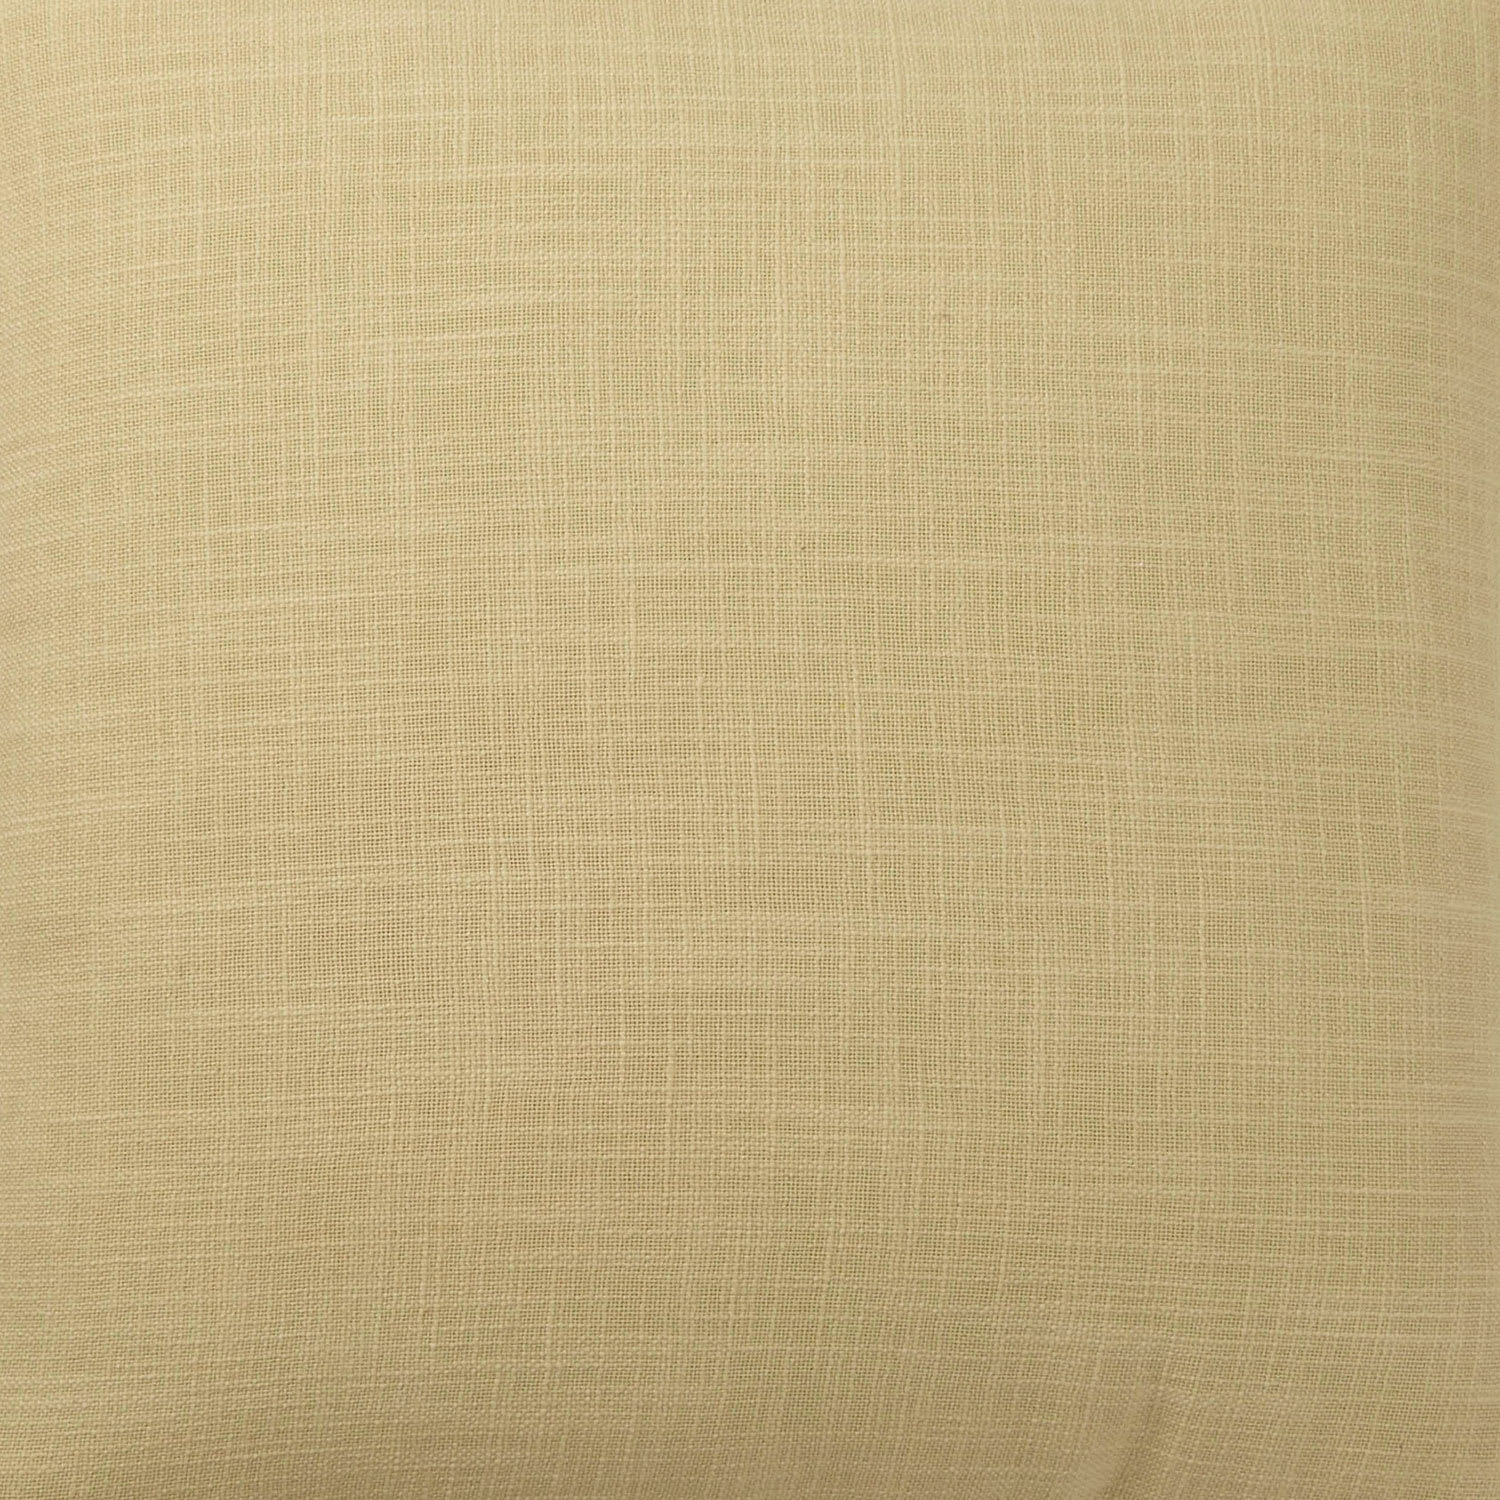 Concord Pillow Covers - Maize